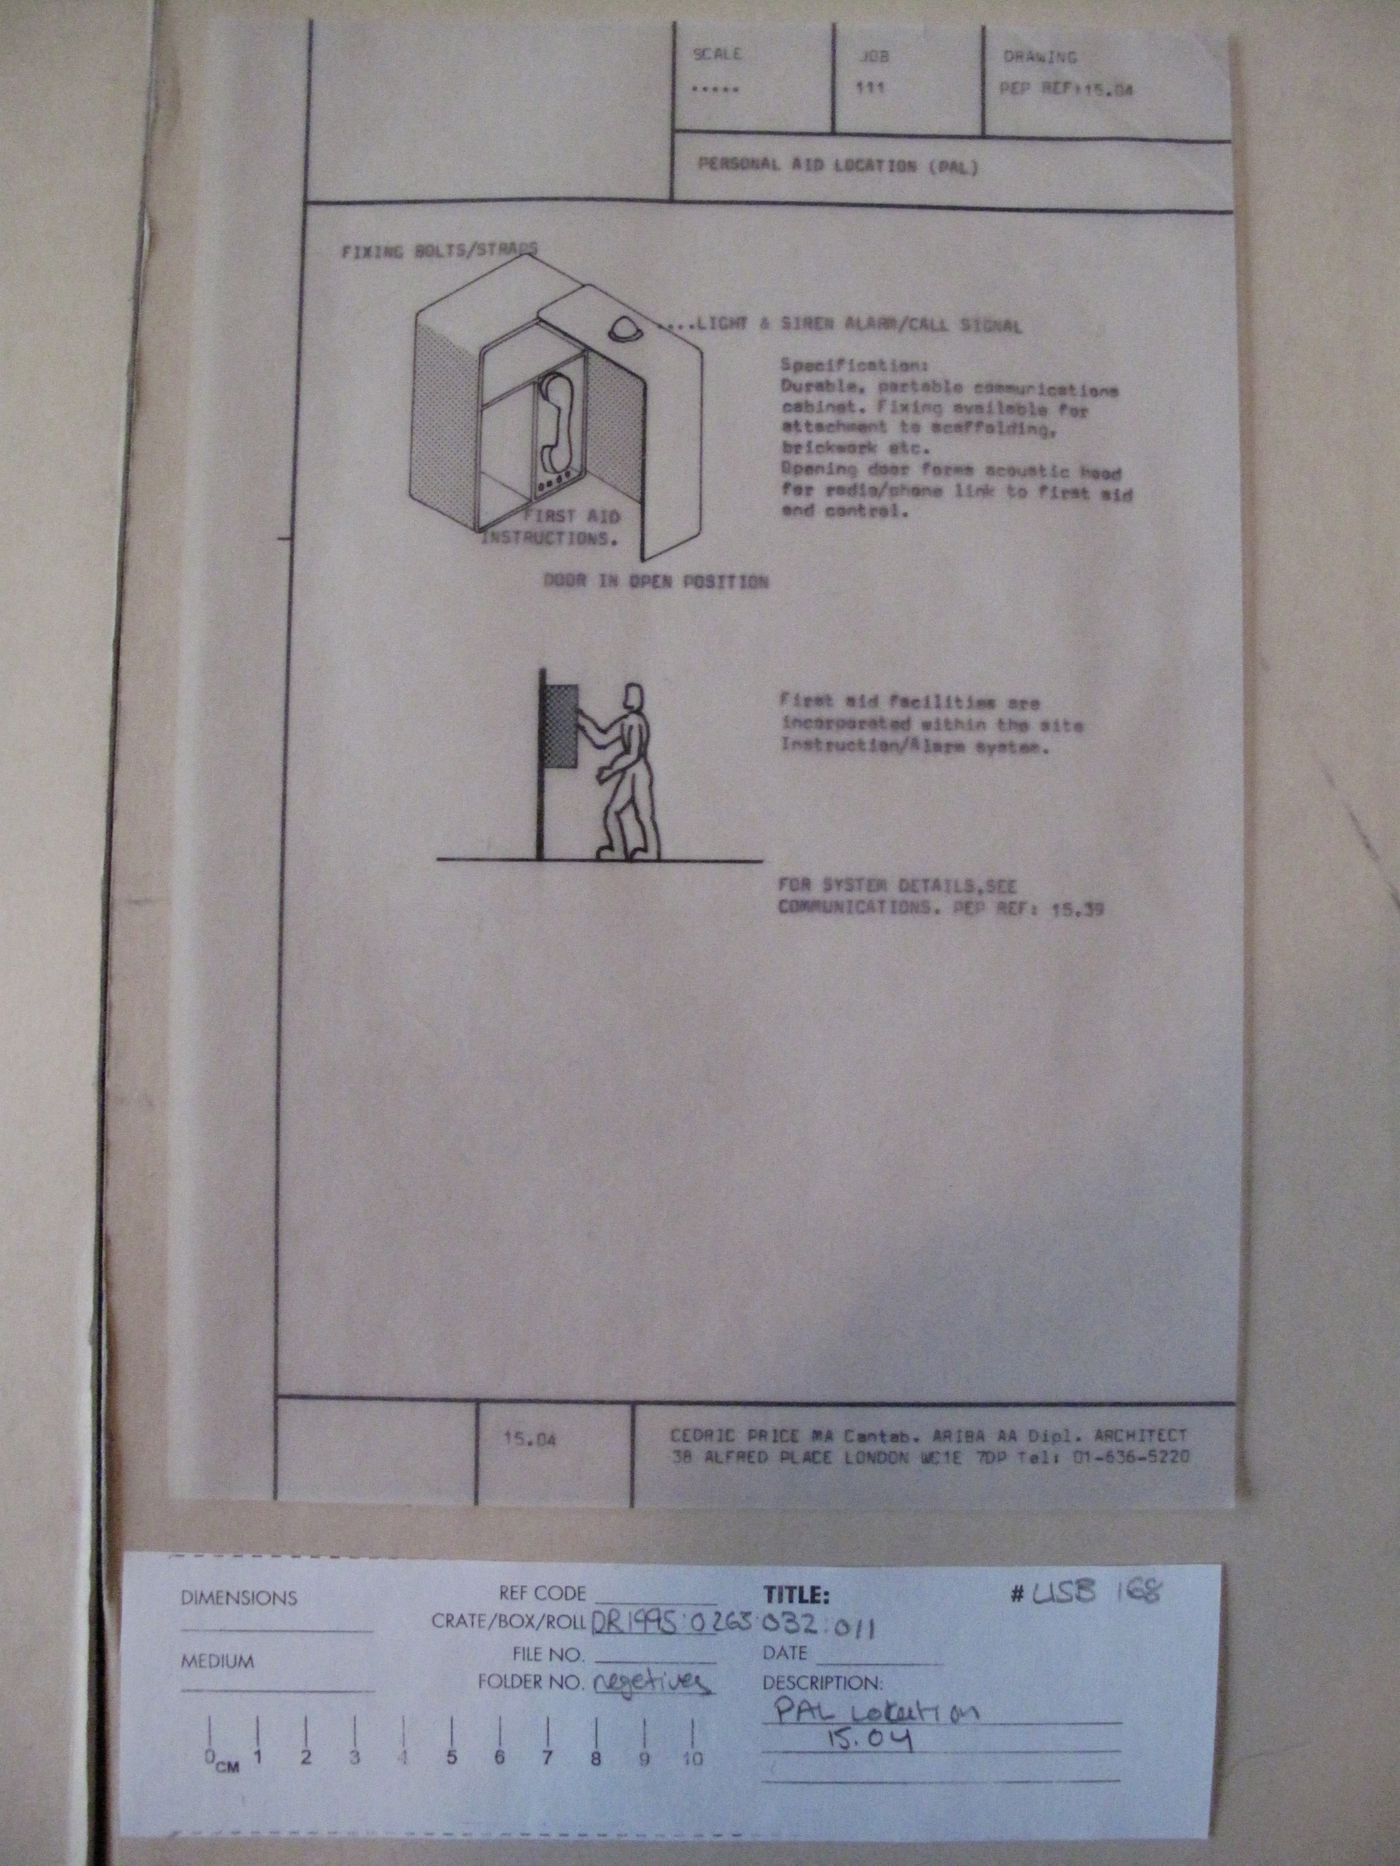 McAppy: presentation drawing for a Personal Aid Location (PAL)